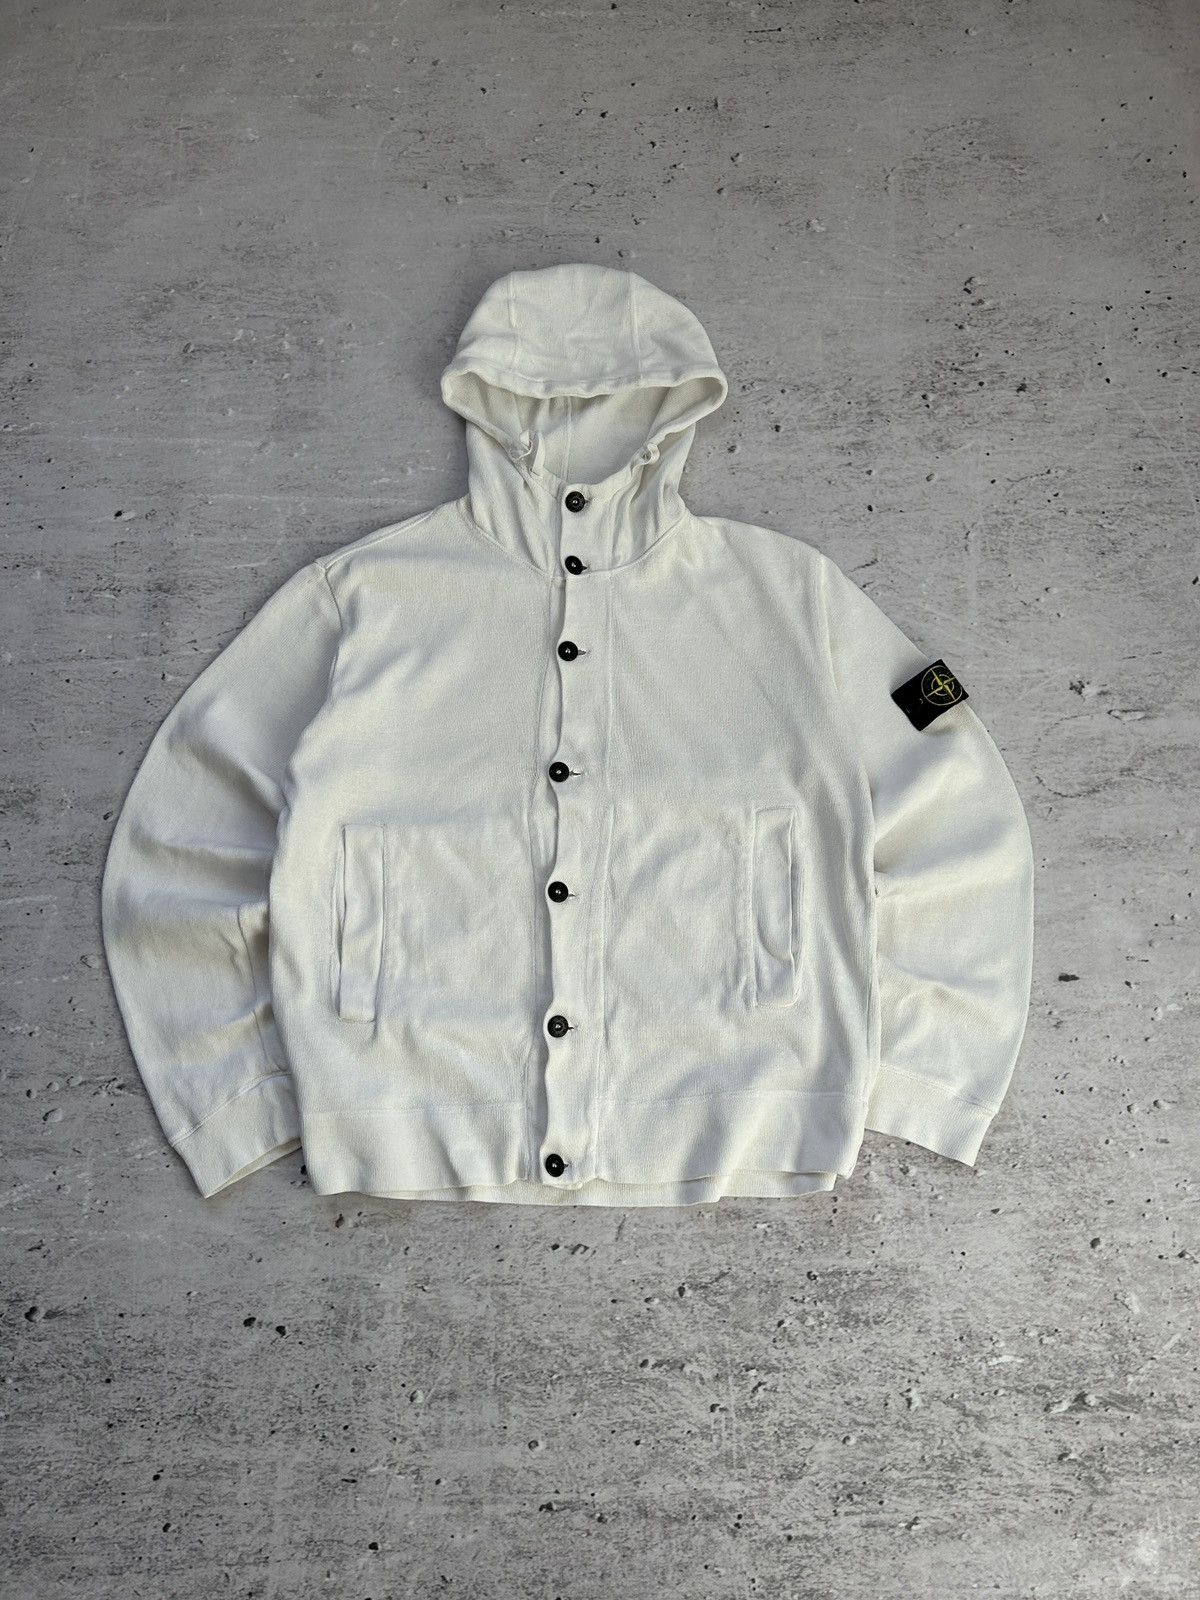 Pre-owned Stone Island X Vintage Stone Island White Full Button Hoodie 90-00s